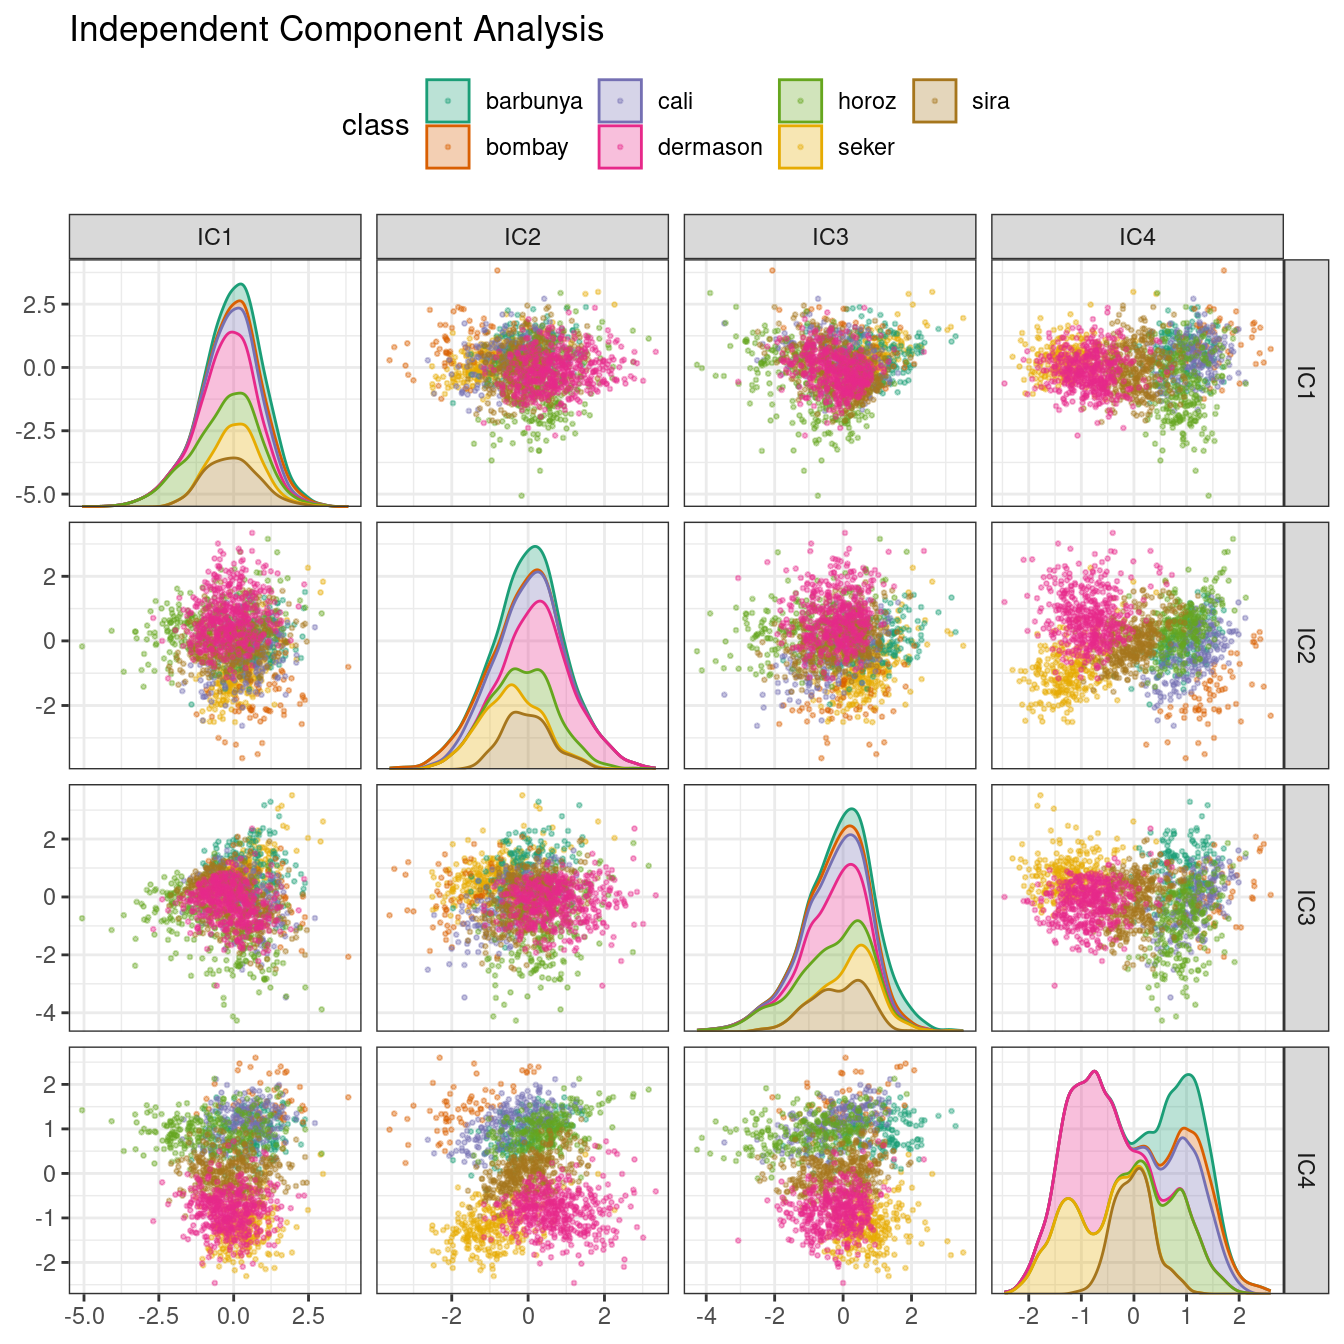 ICA component scores for the bean validation set, colored by class. There is significant overlap in the first two ICA components.